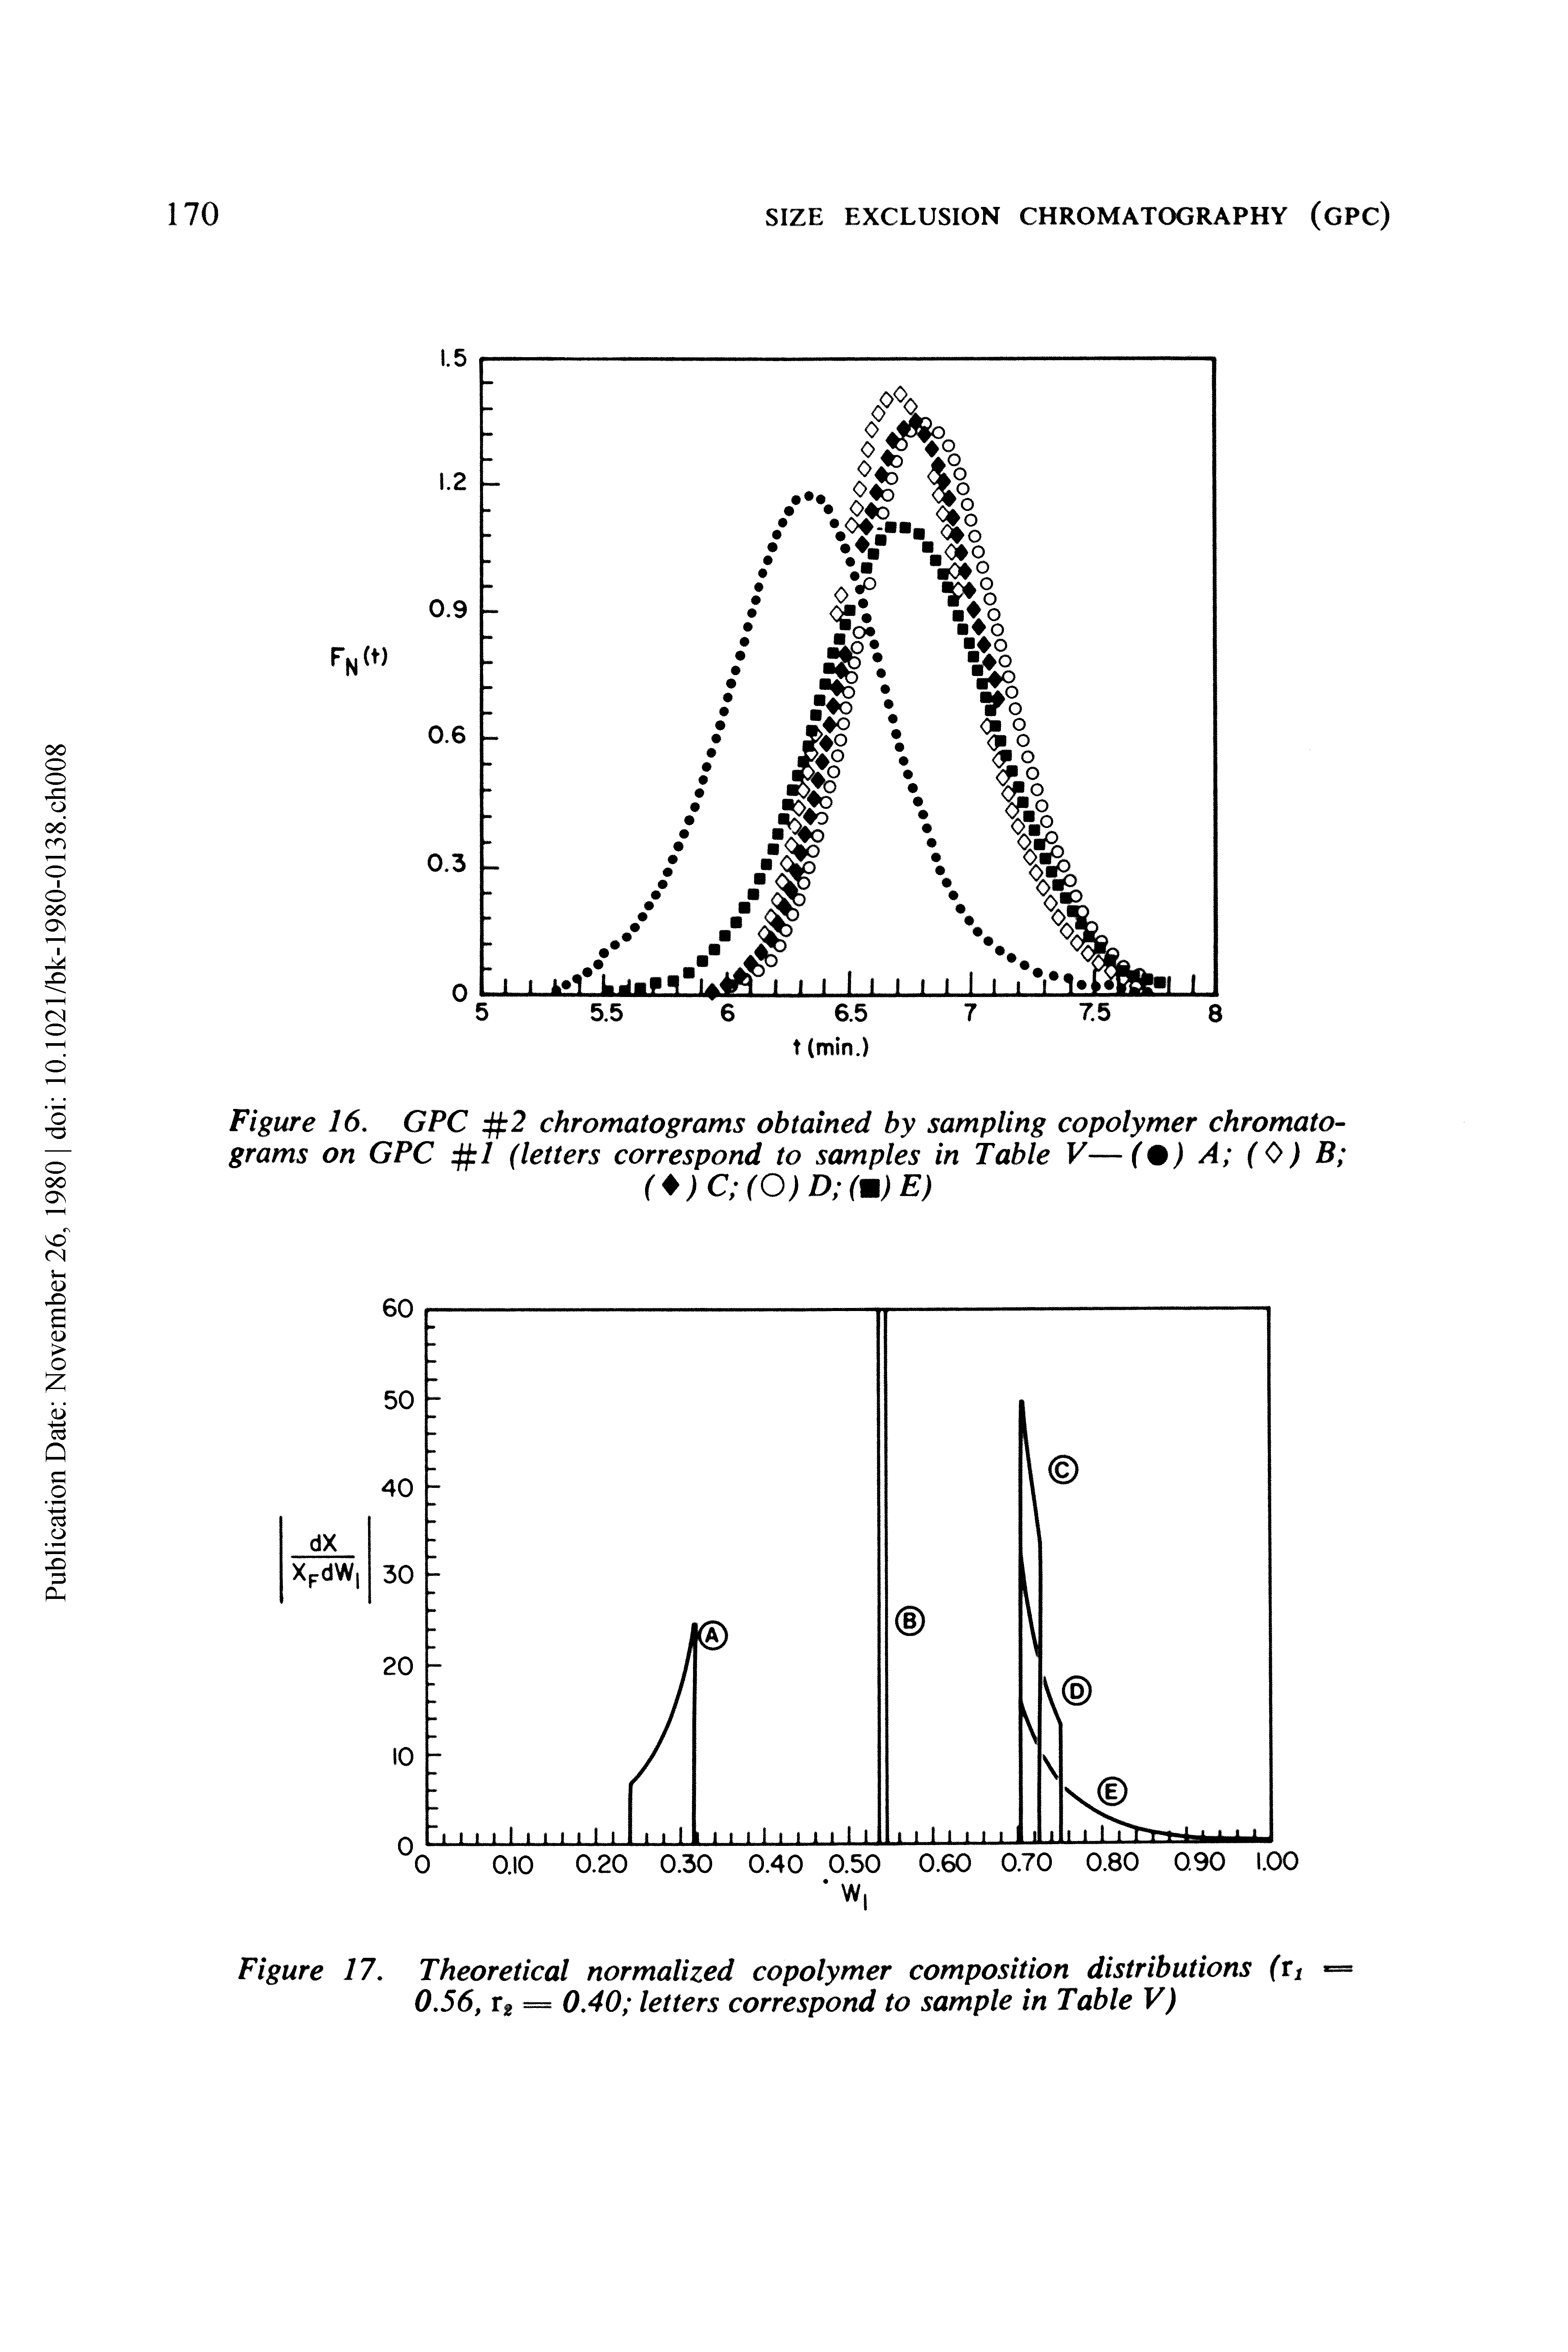 Figure 17. Theoretical normalized copolymer composition distributions (ti 0.56, Tf = 0.40 letters correspond to sample in Table V)...